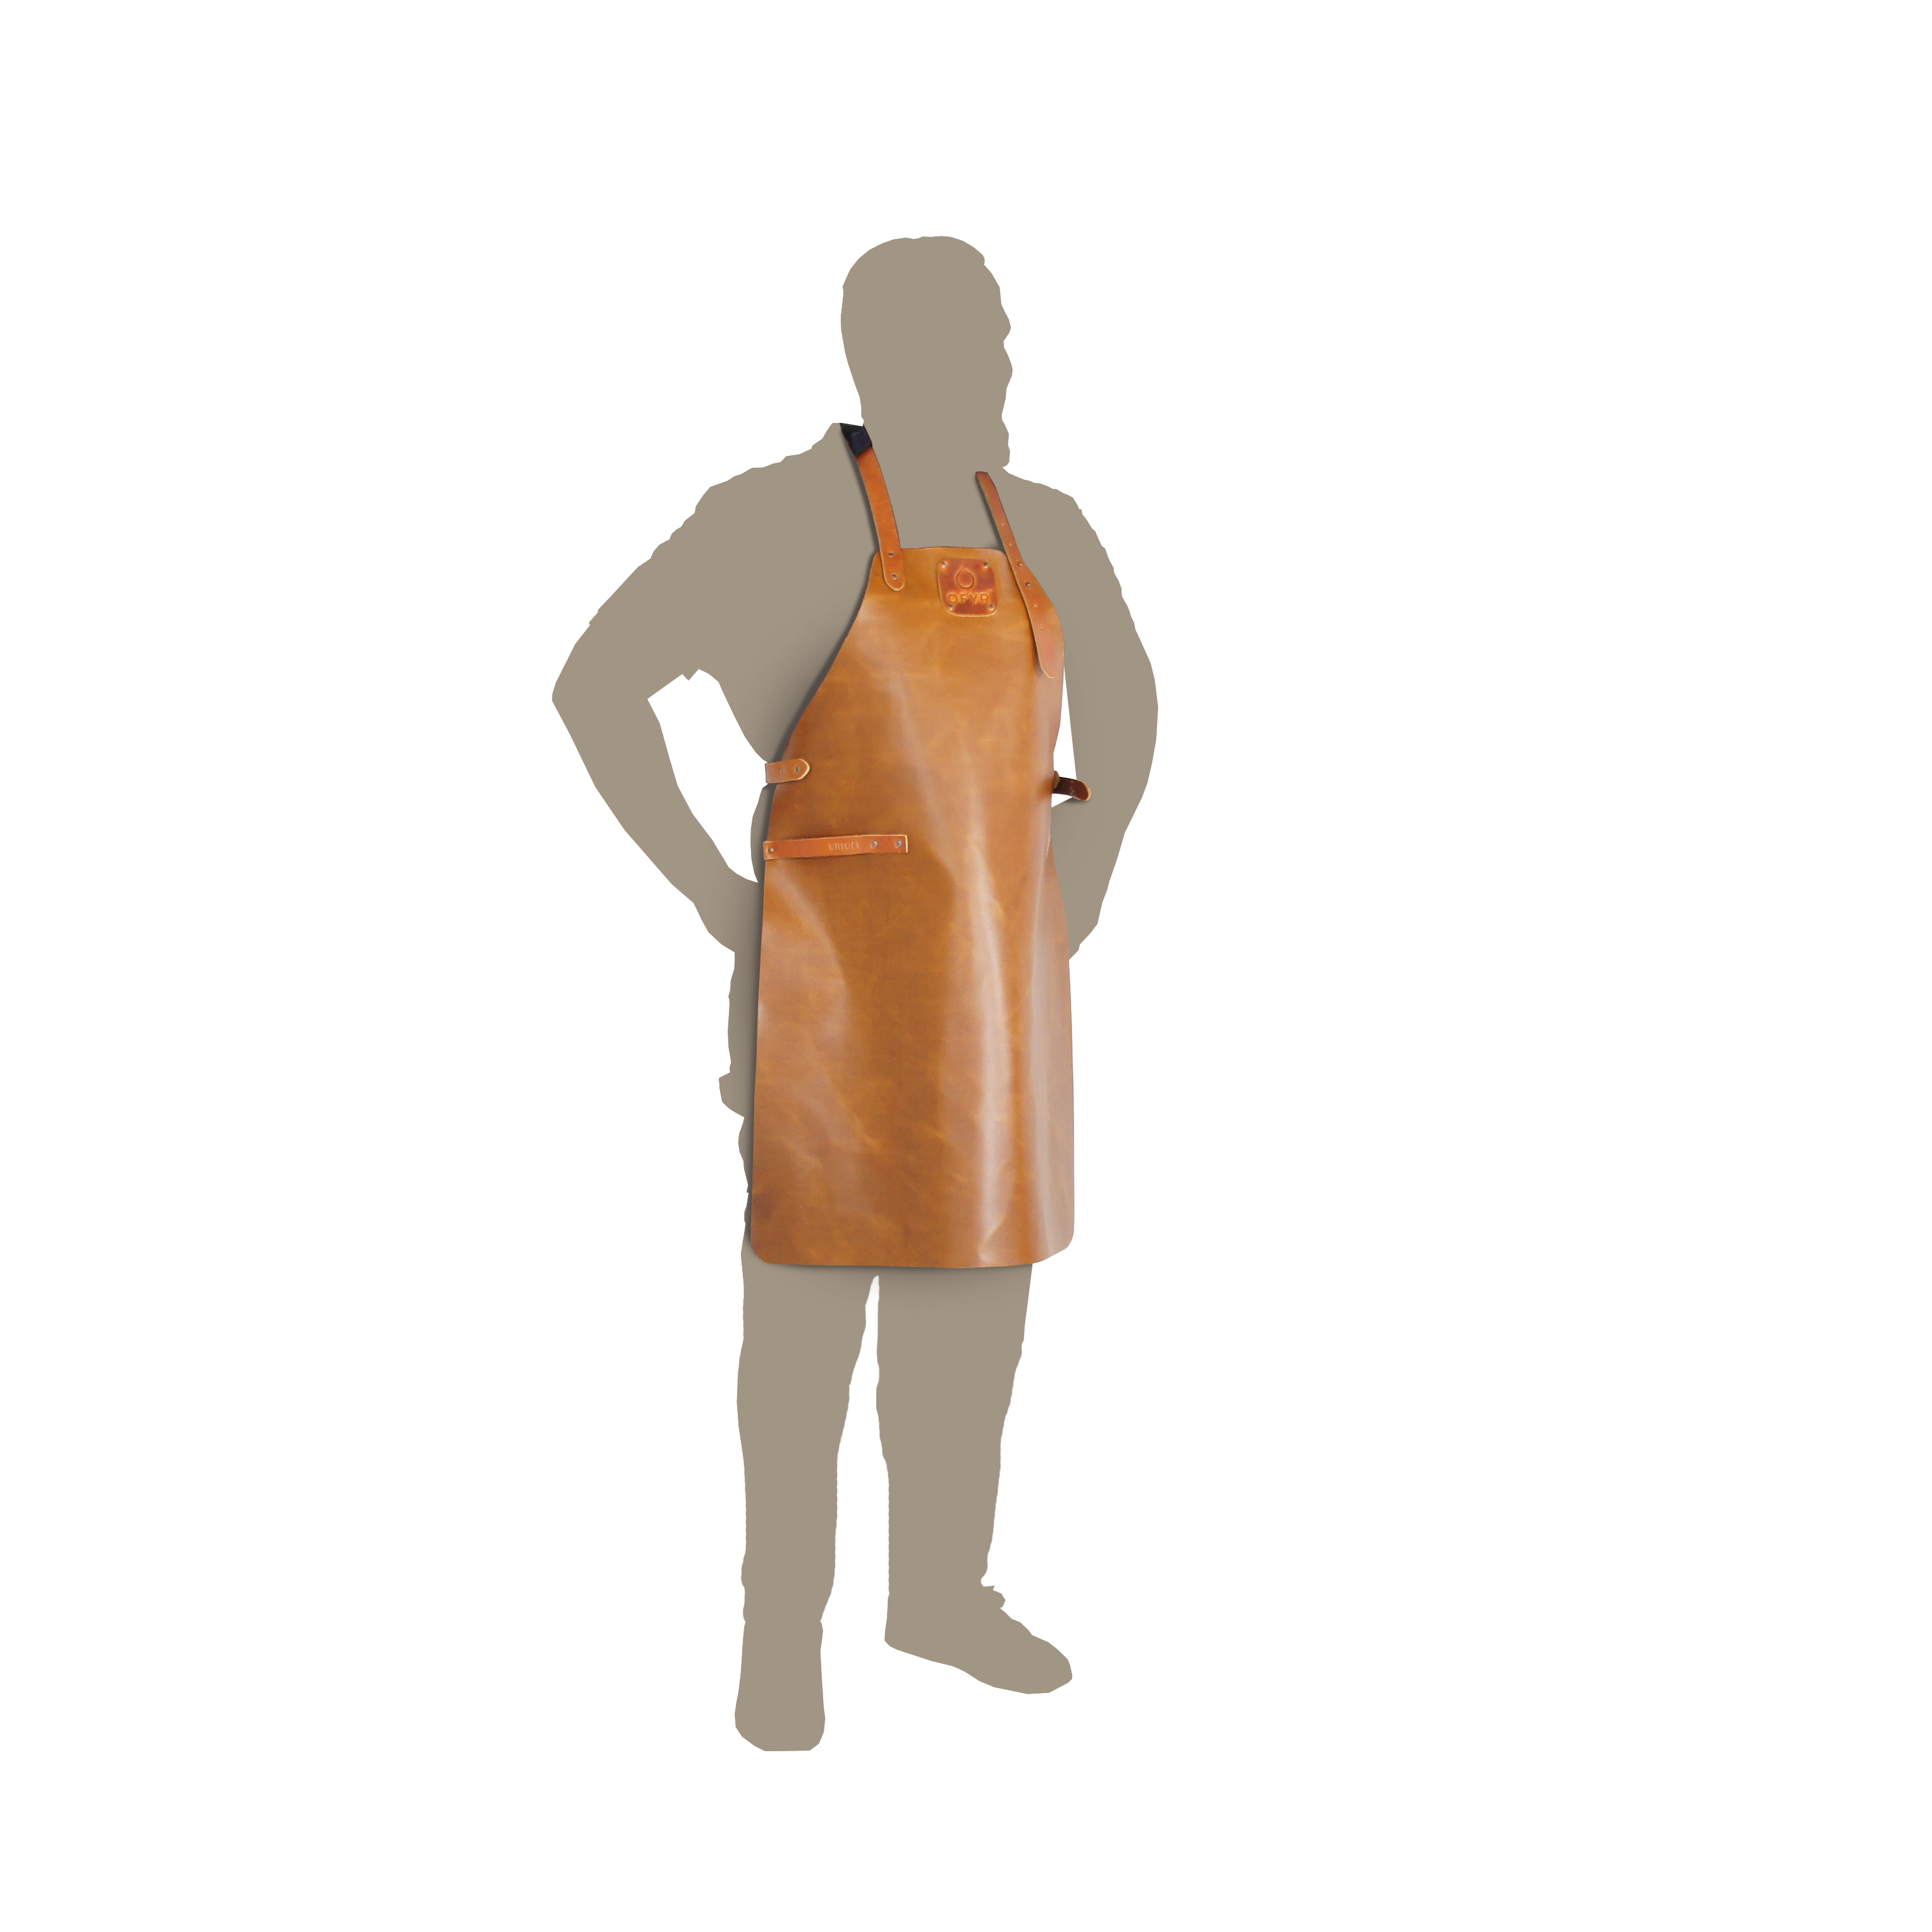 Leather Apron Brown